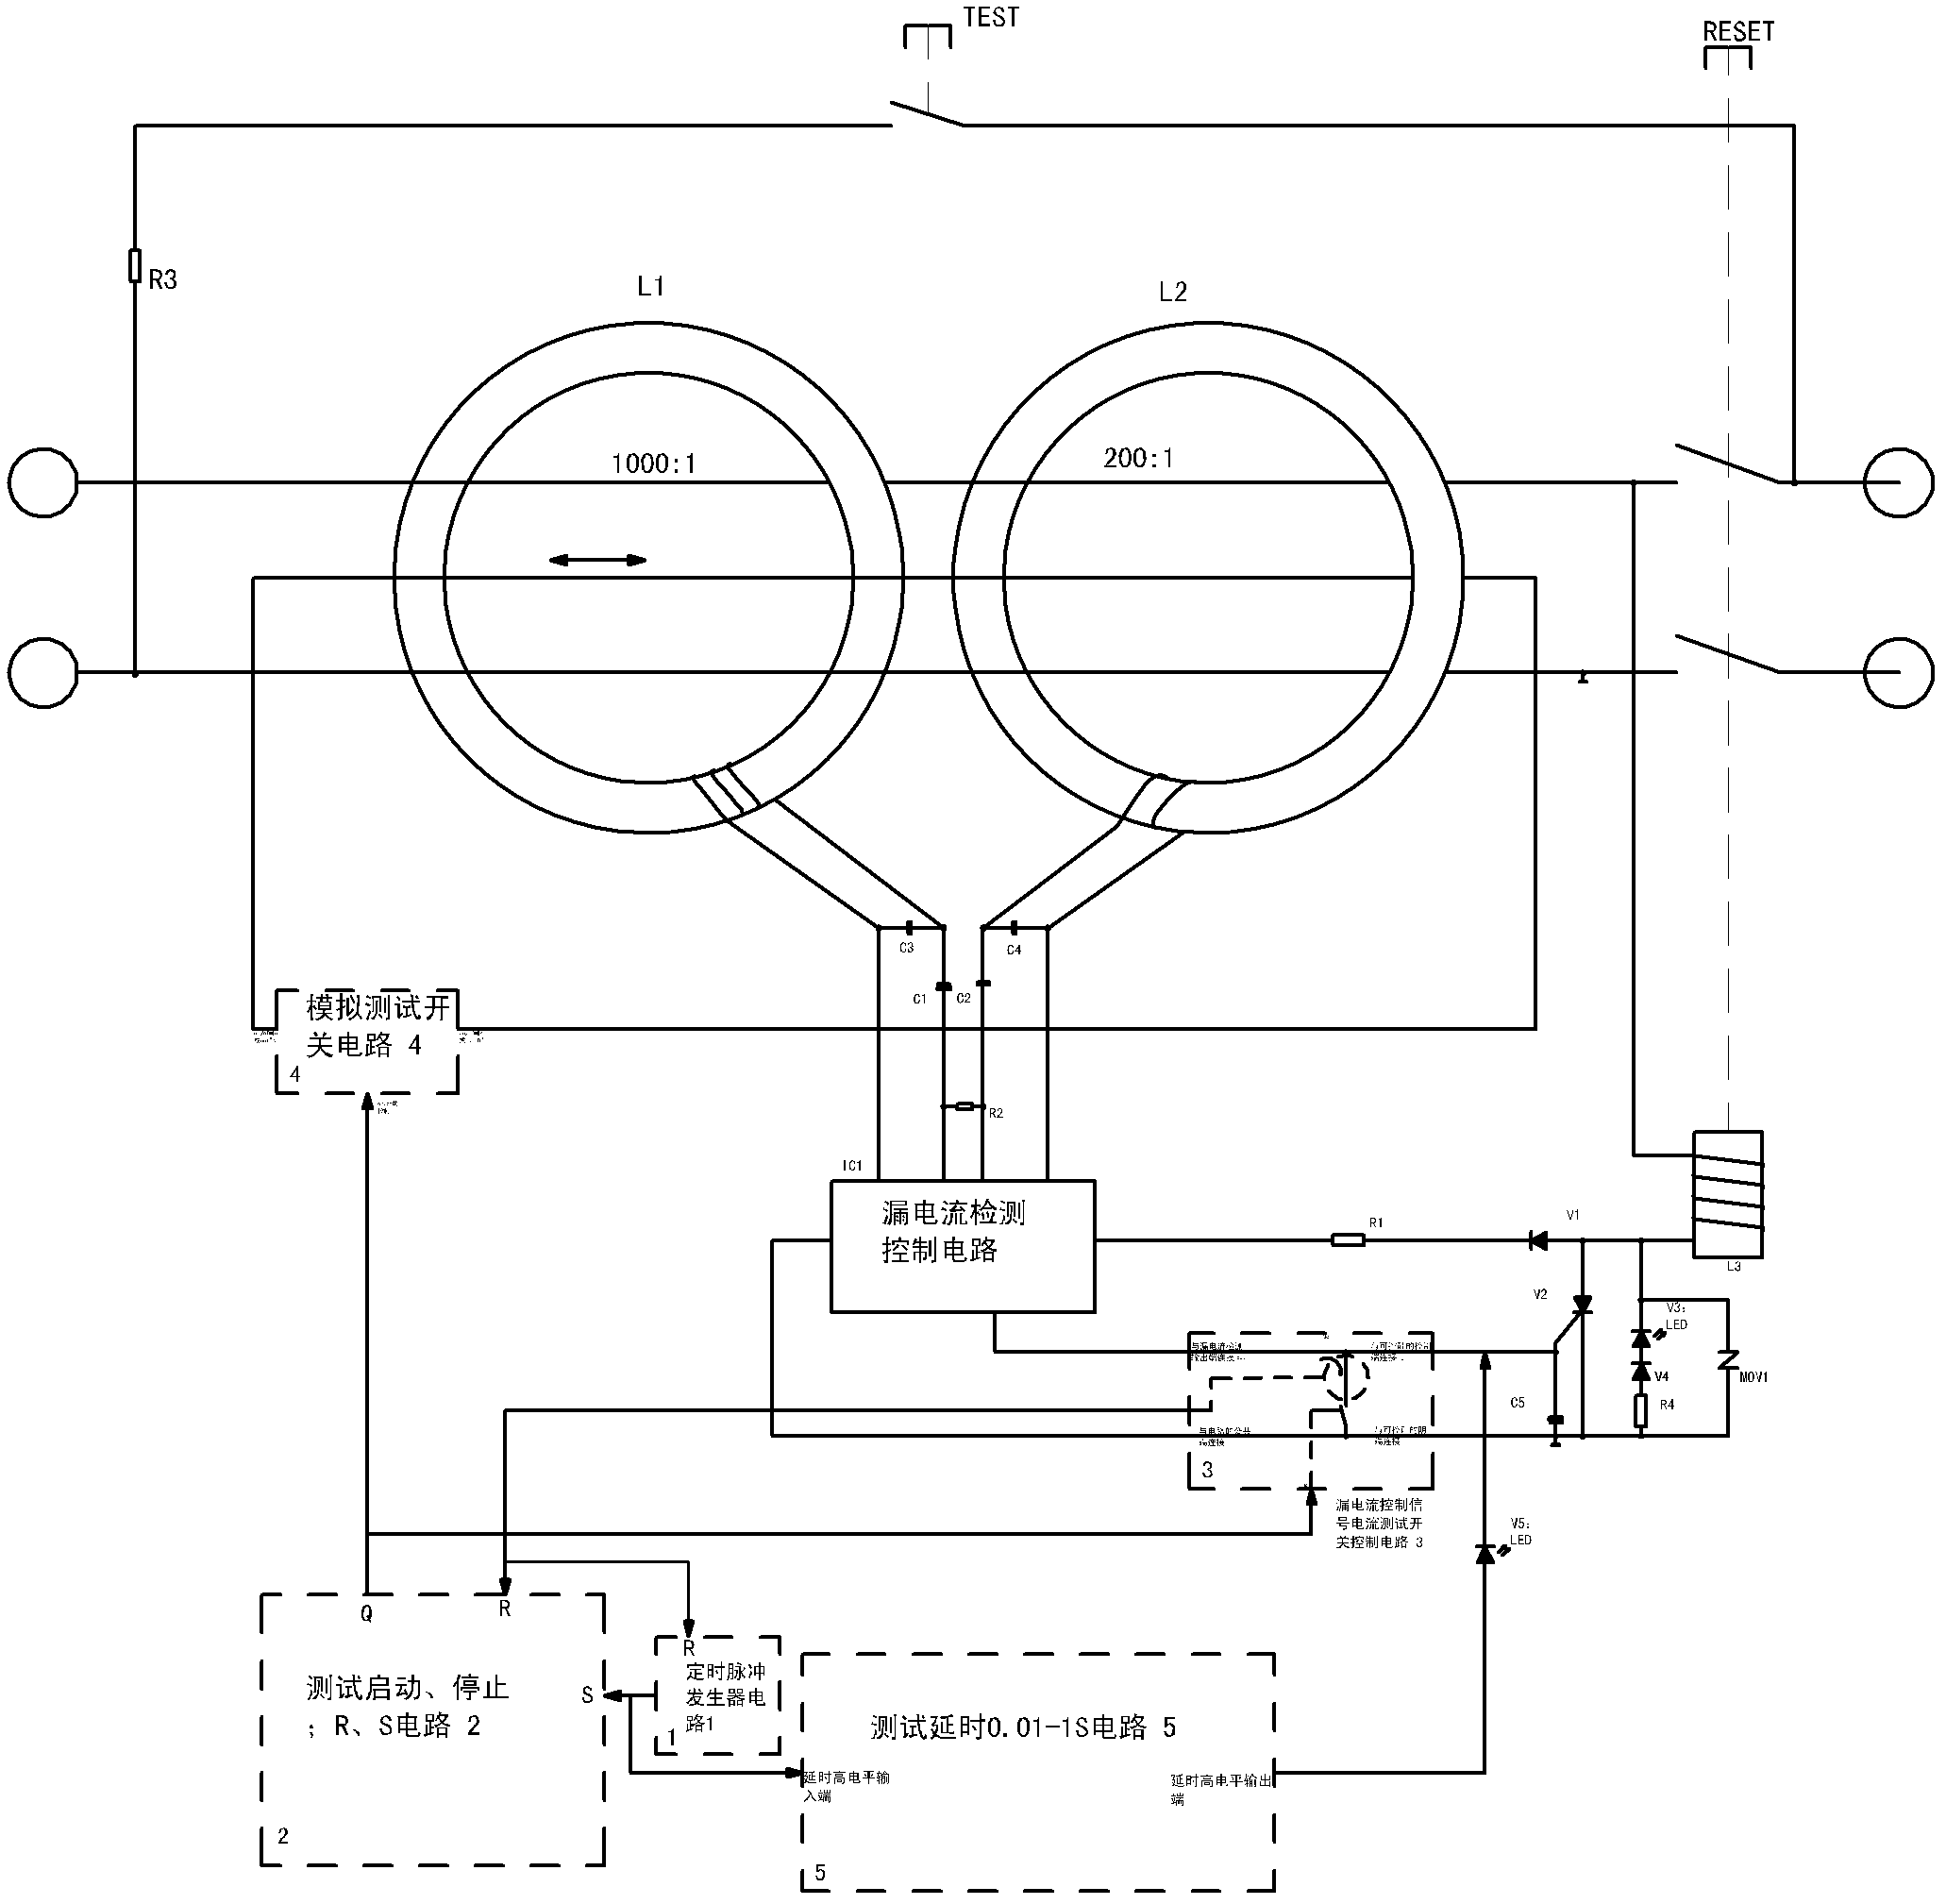 Leakage detecting protection circuit capable of periodically automatically detecting function integrity